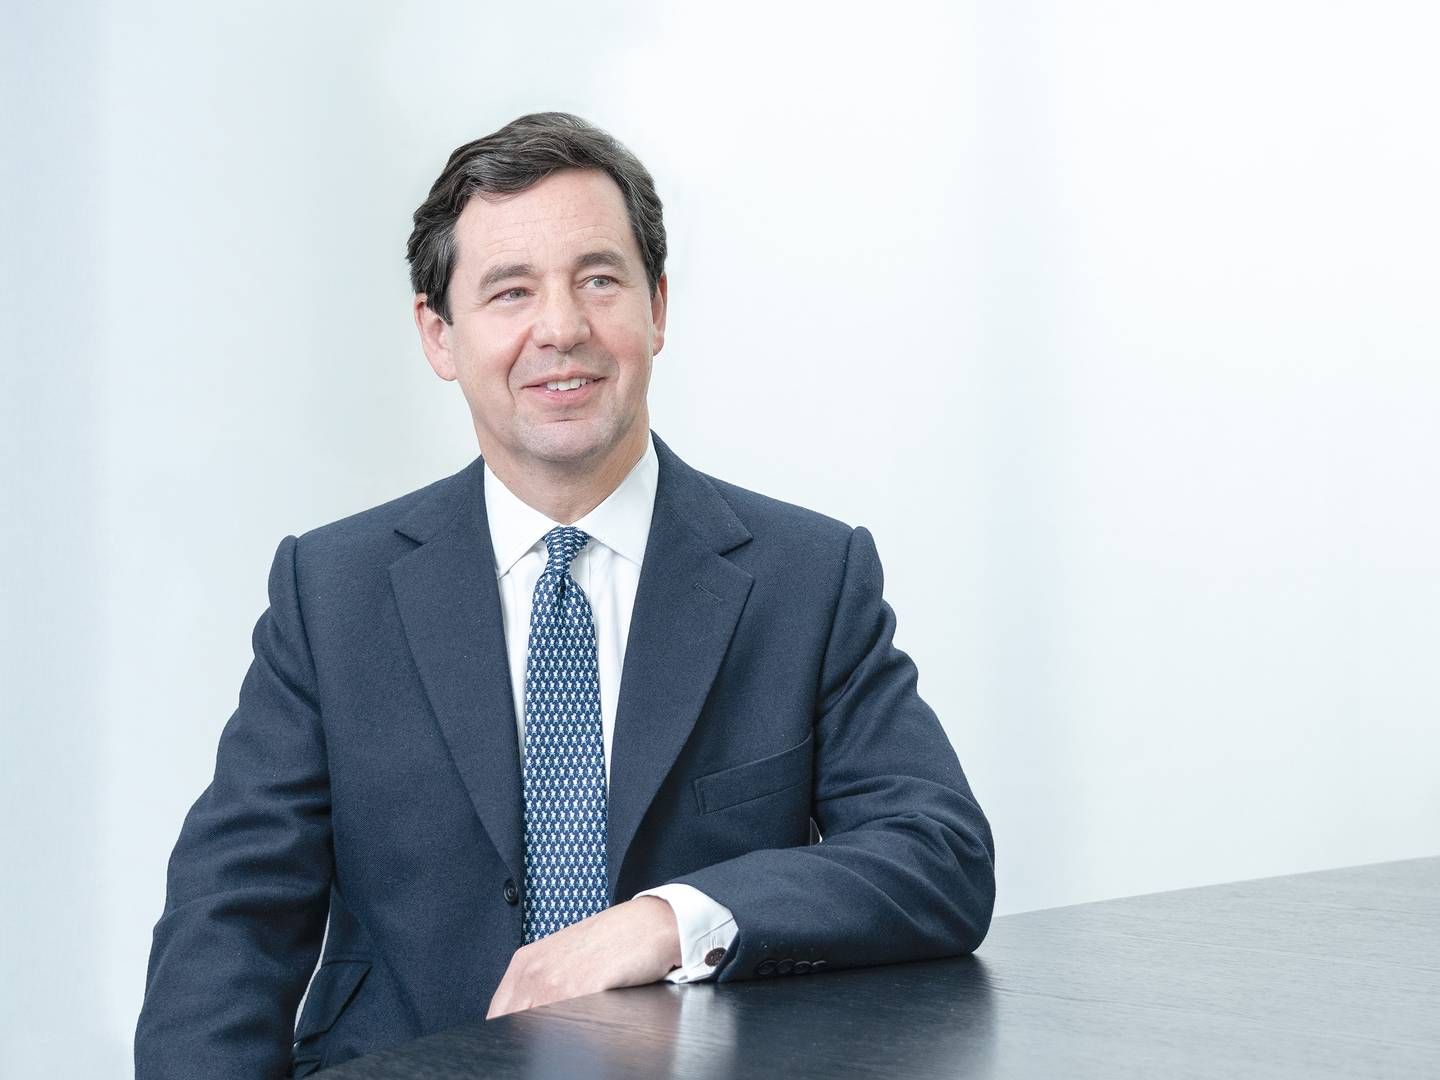 Peter Harrison, Group Chief Executive at Schroders. | Photo: PR/ Schroders